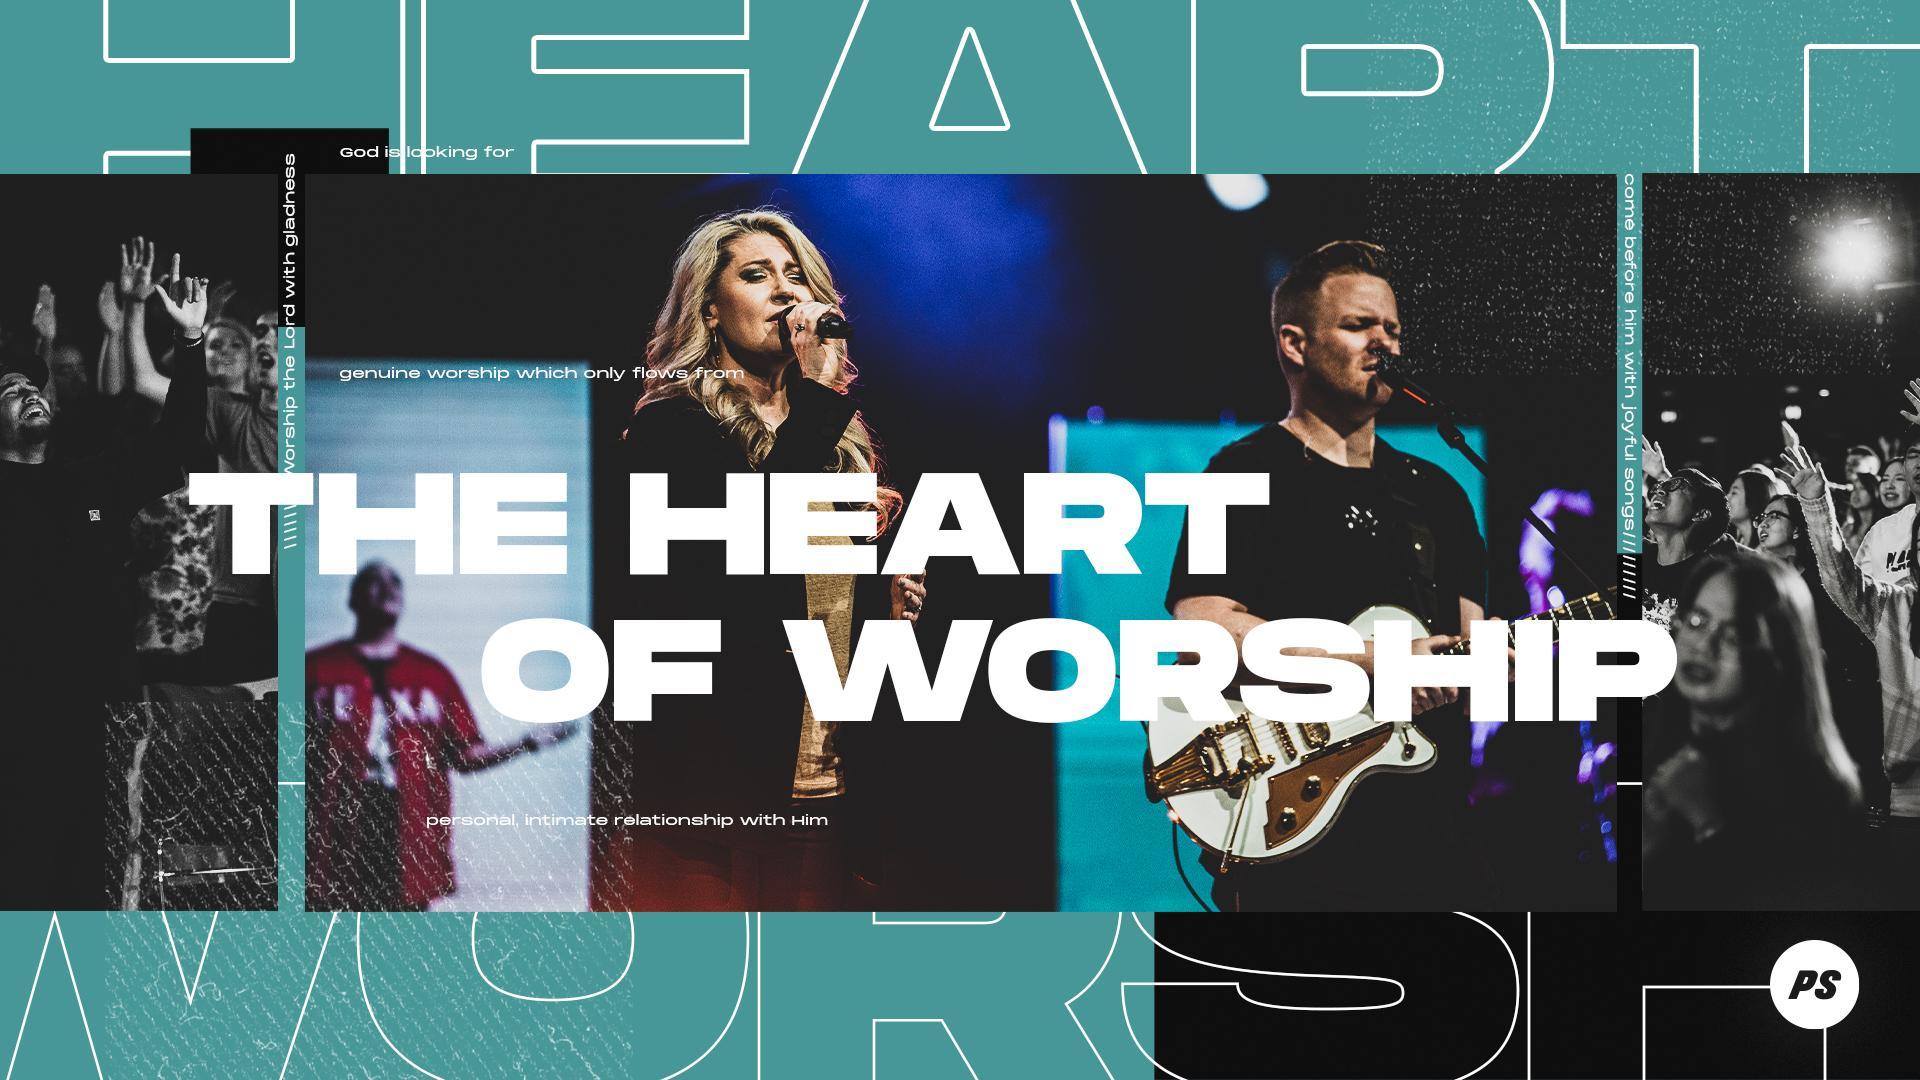 Featured Image for “The Heart of Worship”